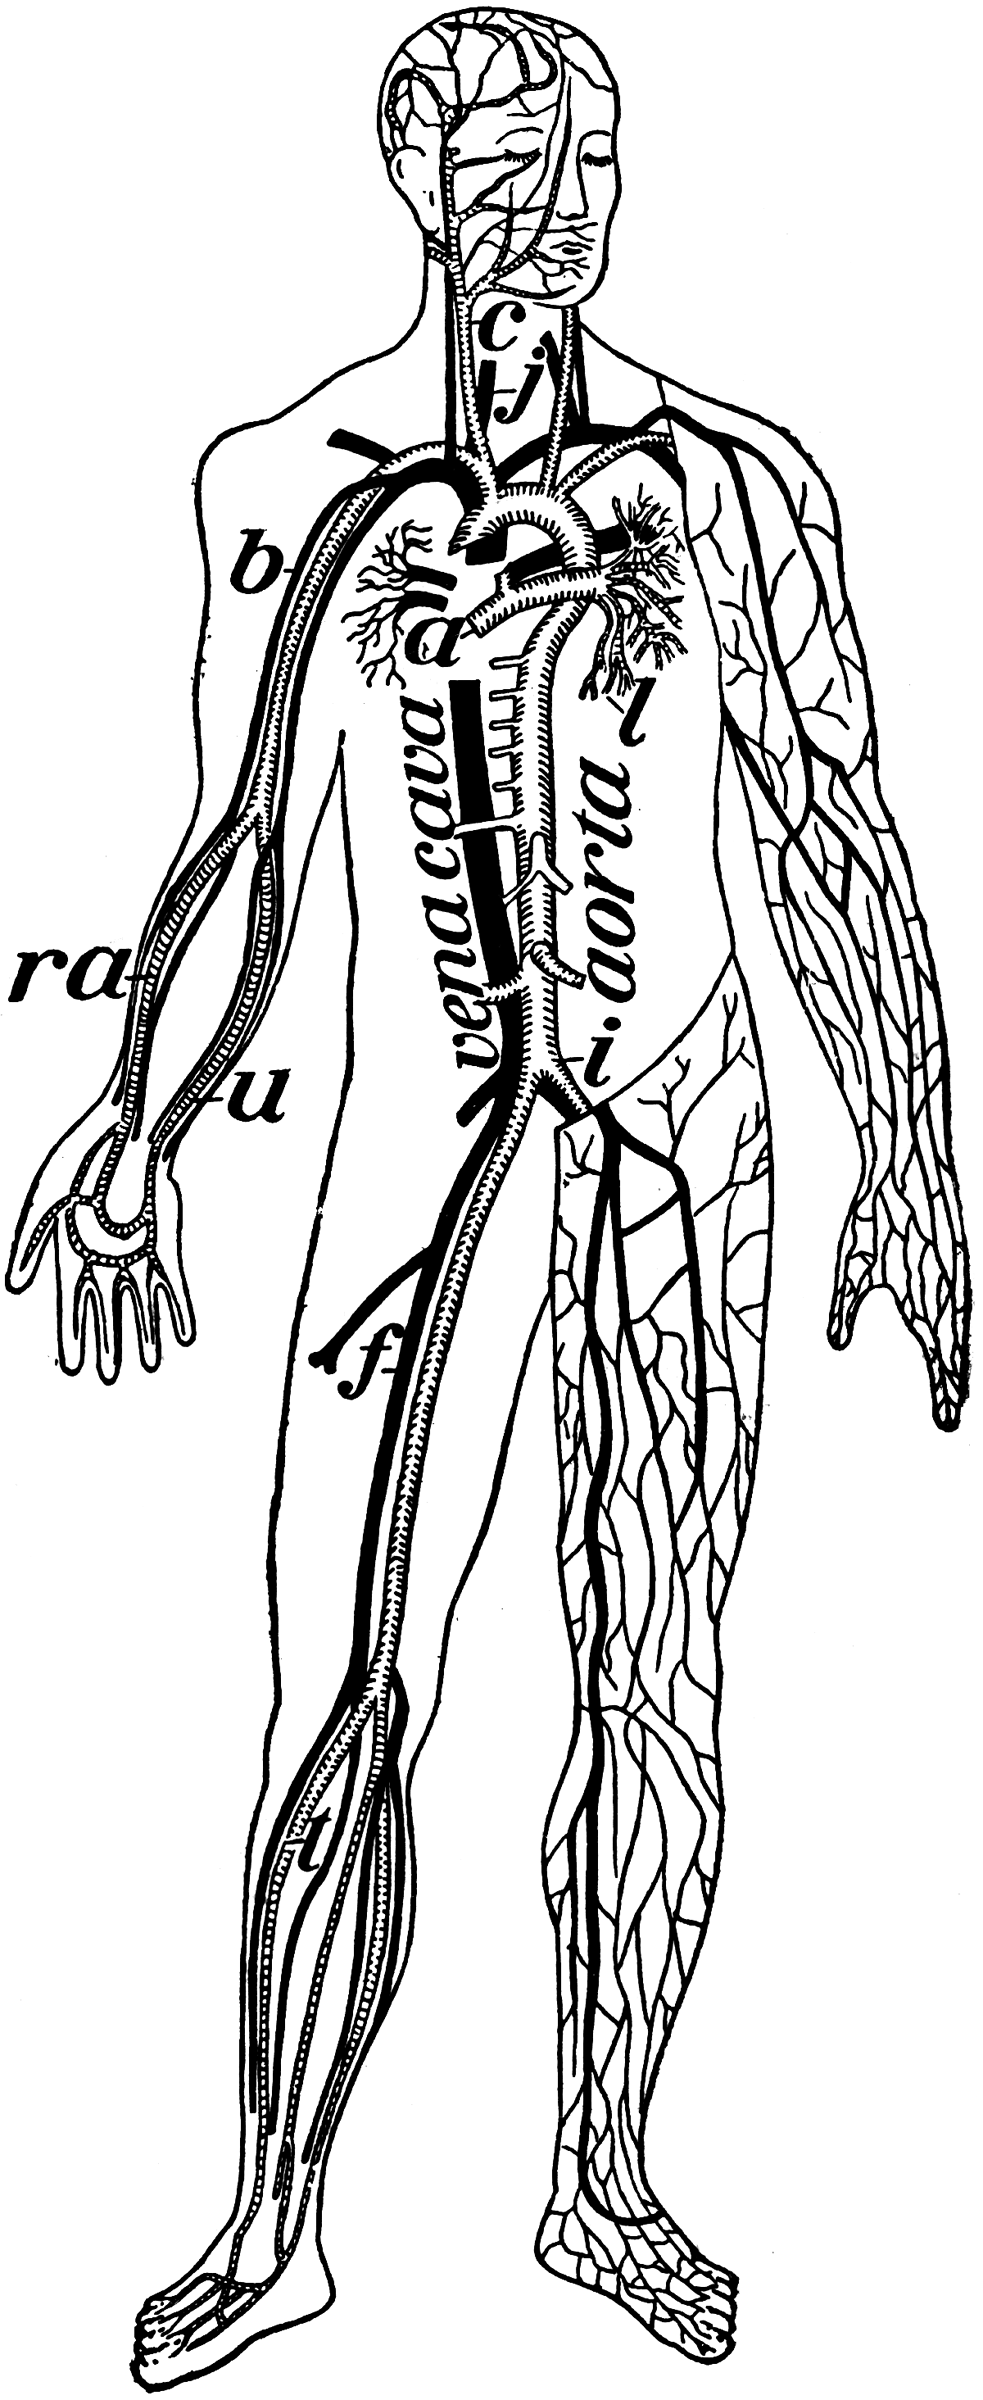 Veins and Arteries of the Body | ClipArt ETC